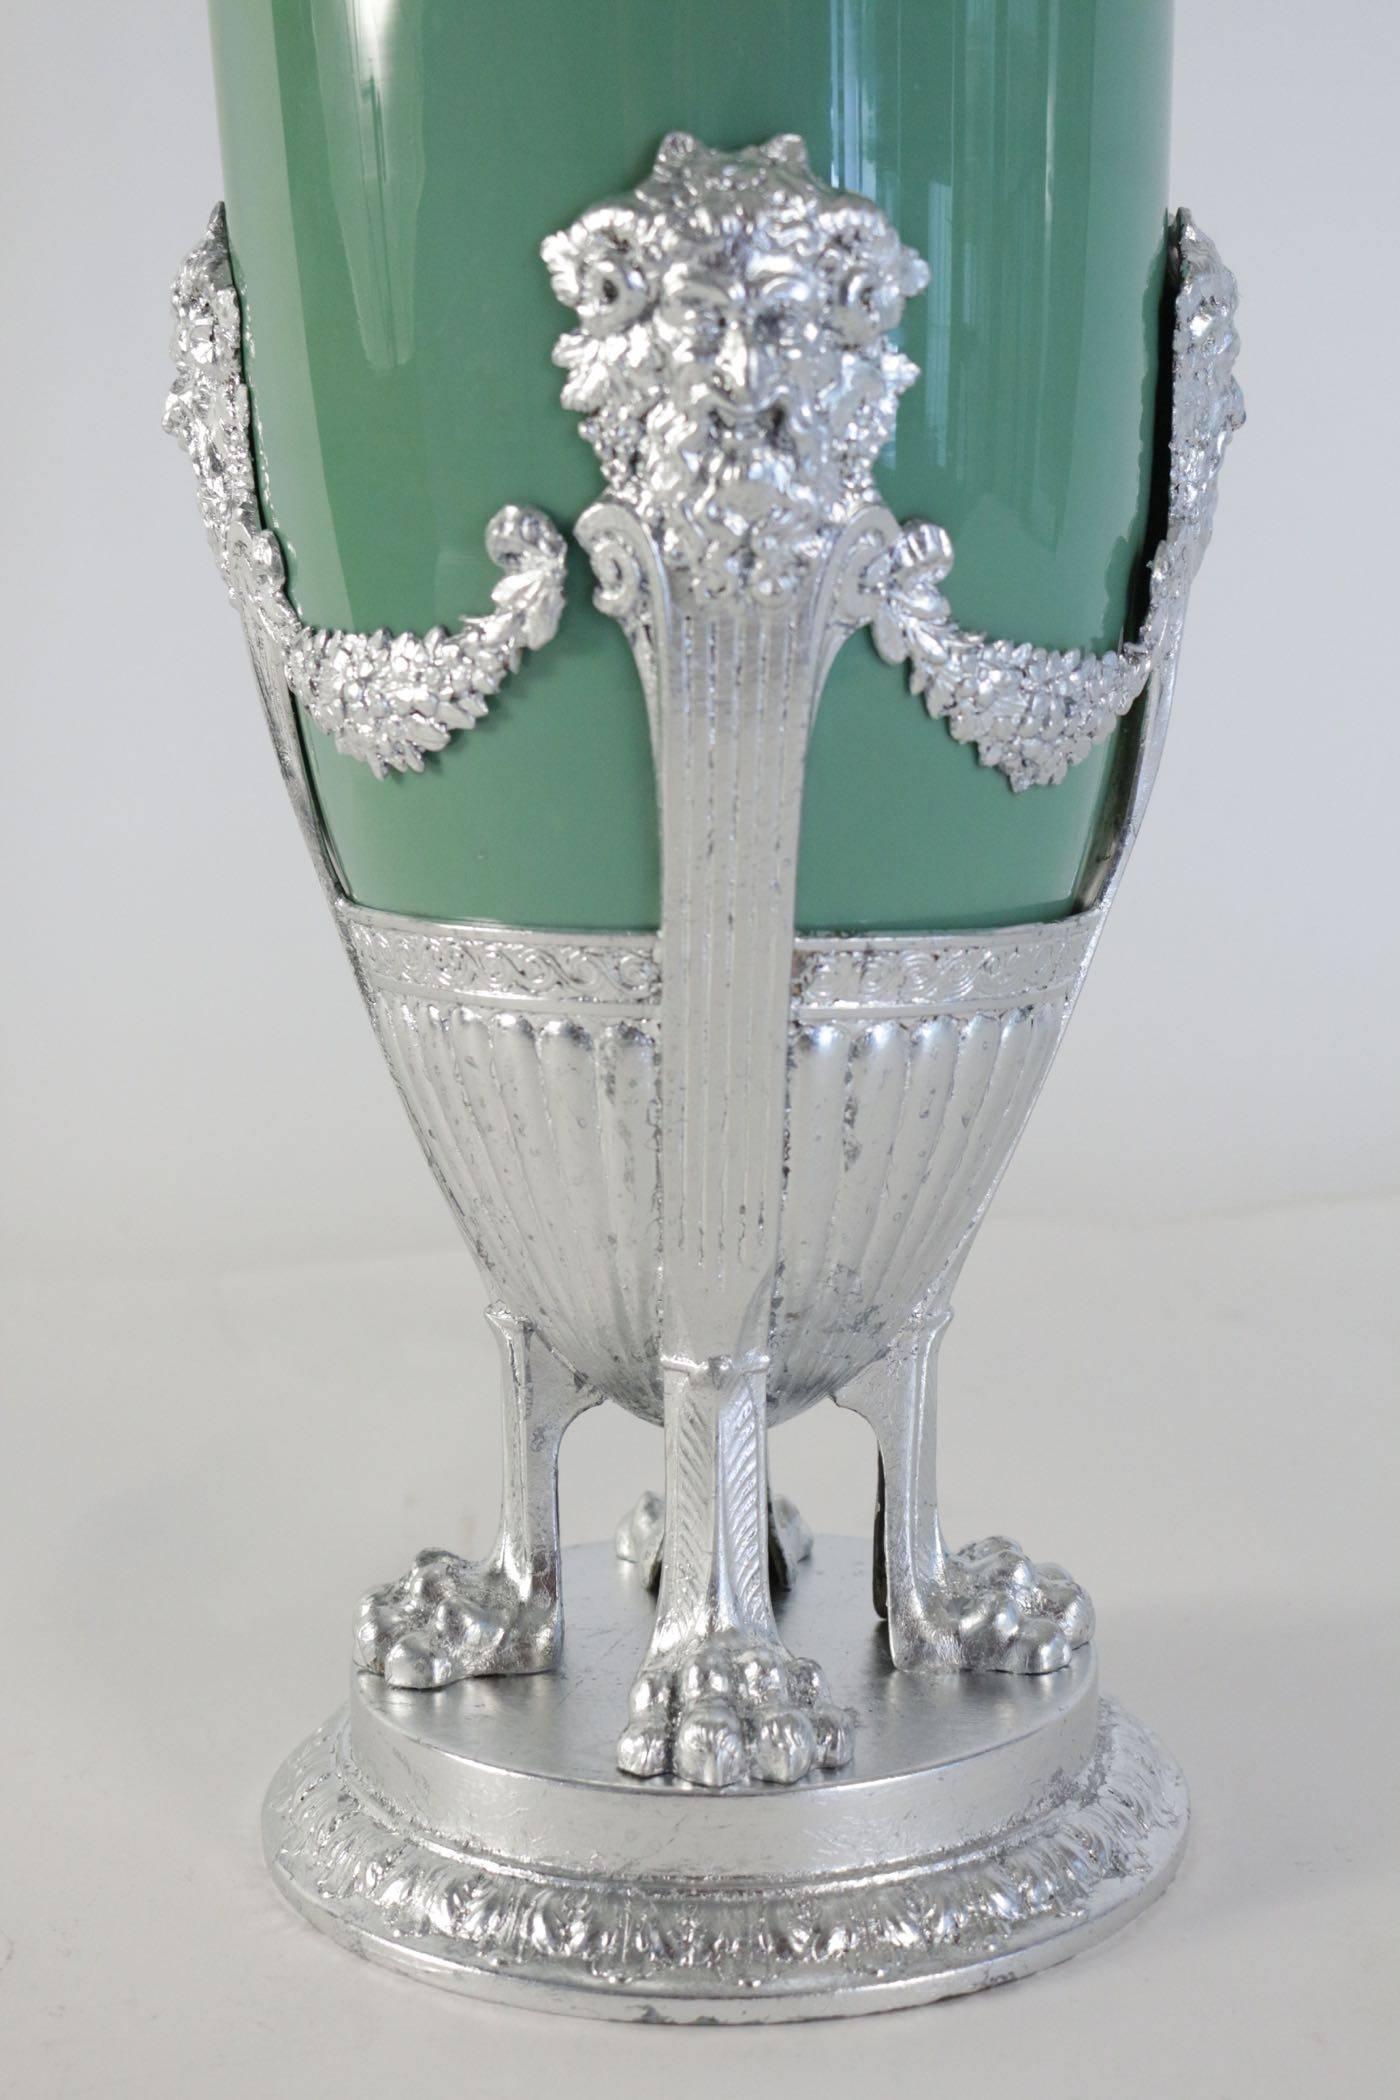 French Celadon Vase in Faience, Silver Plate and Silver Leaf, 19th Century Period For Sale